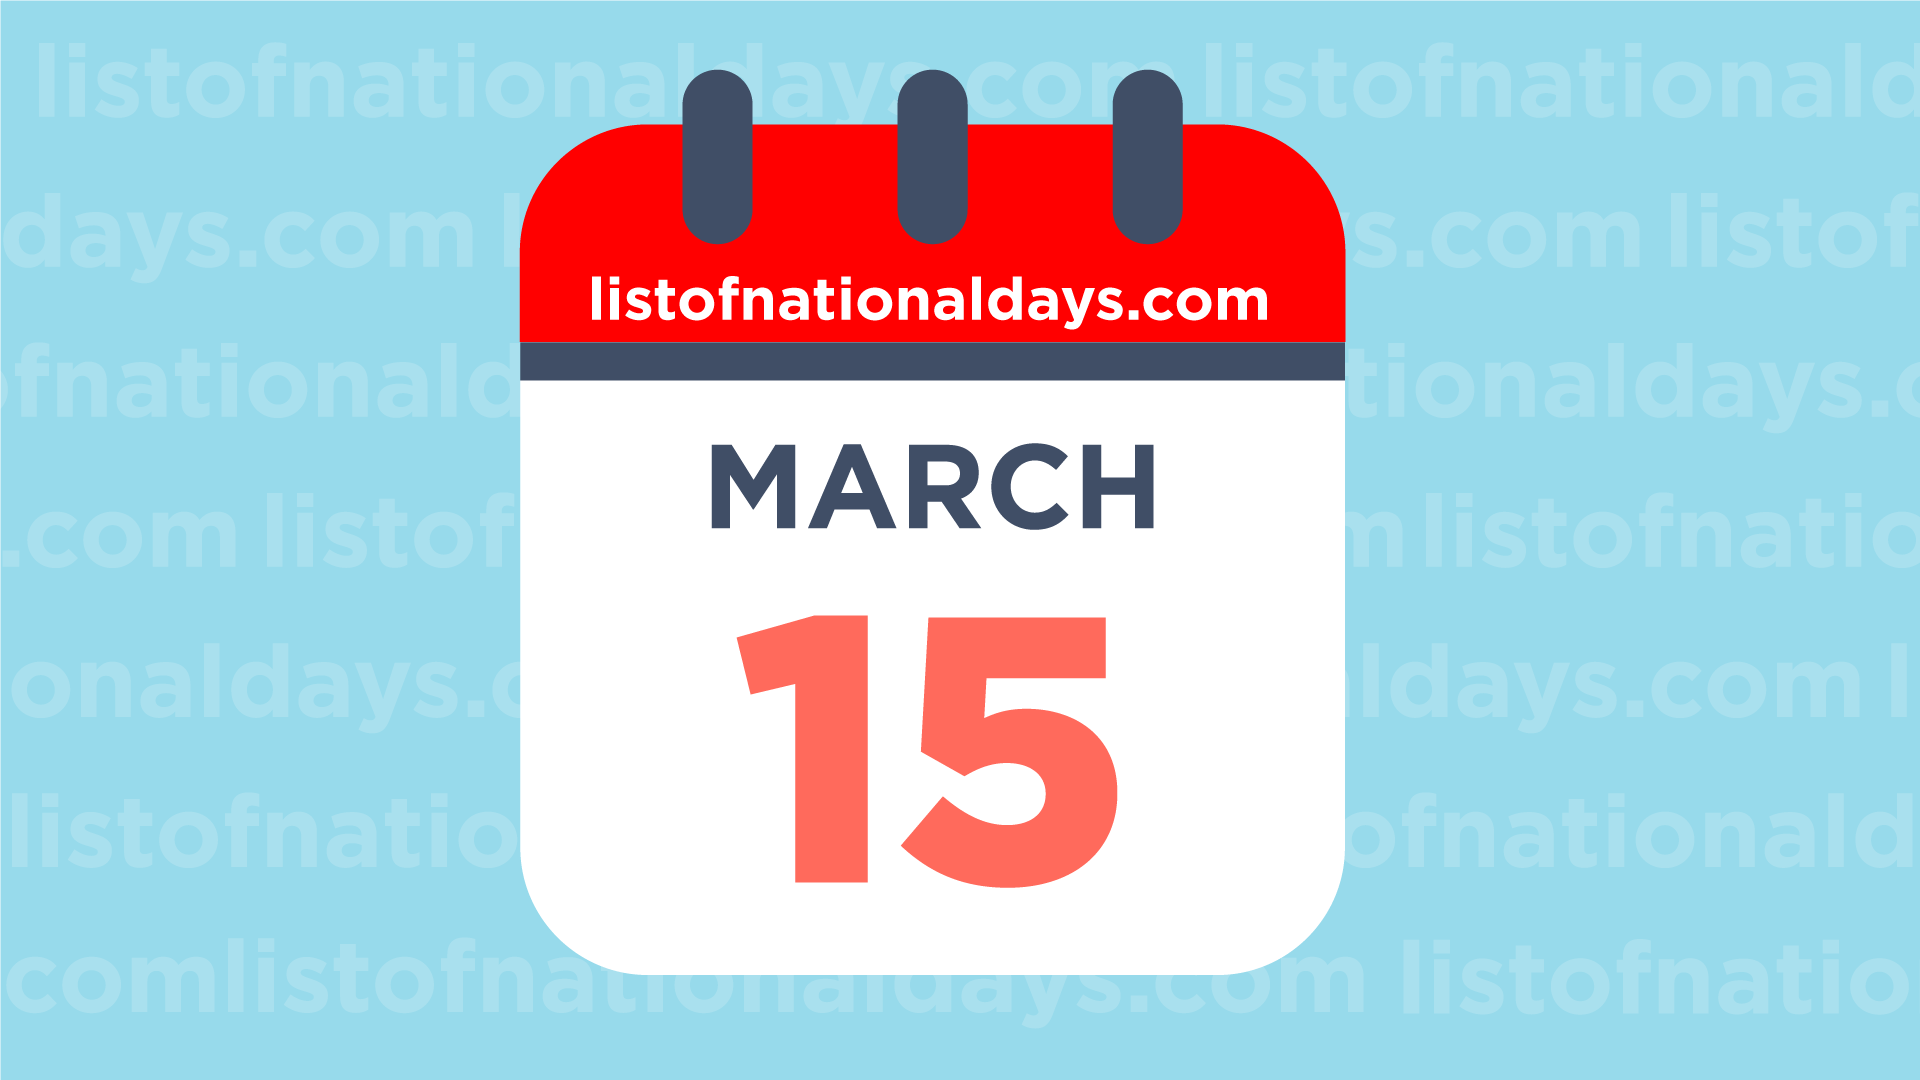 MARCH 15TH National Holidays,Observances & Famous Birthdays